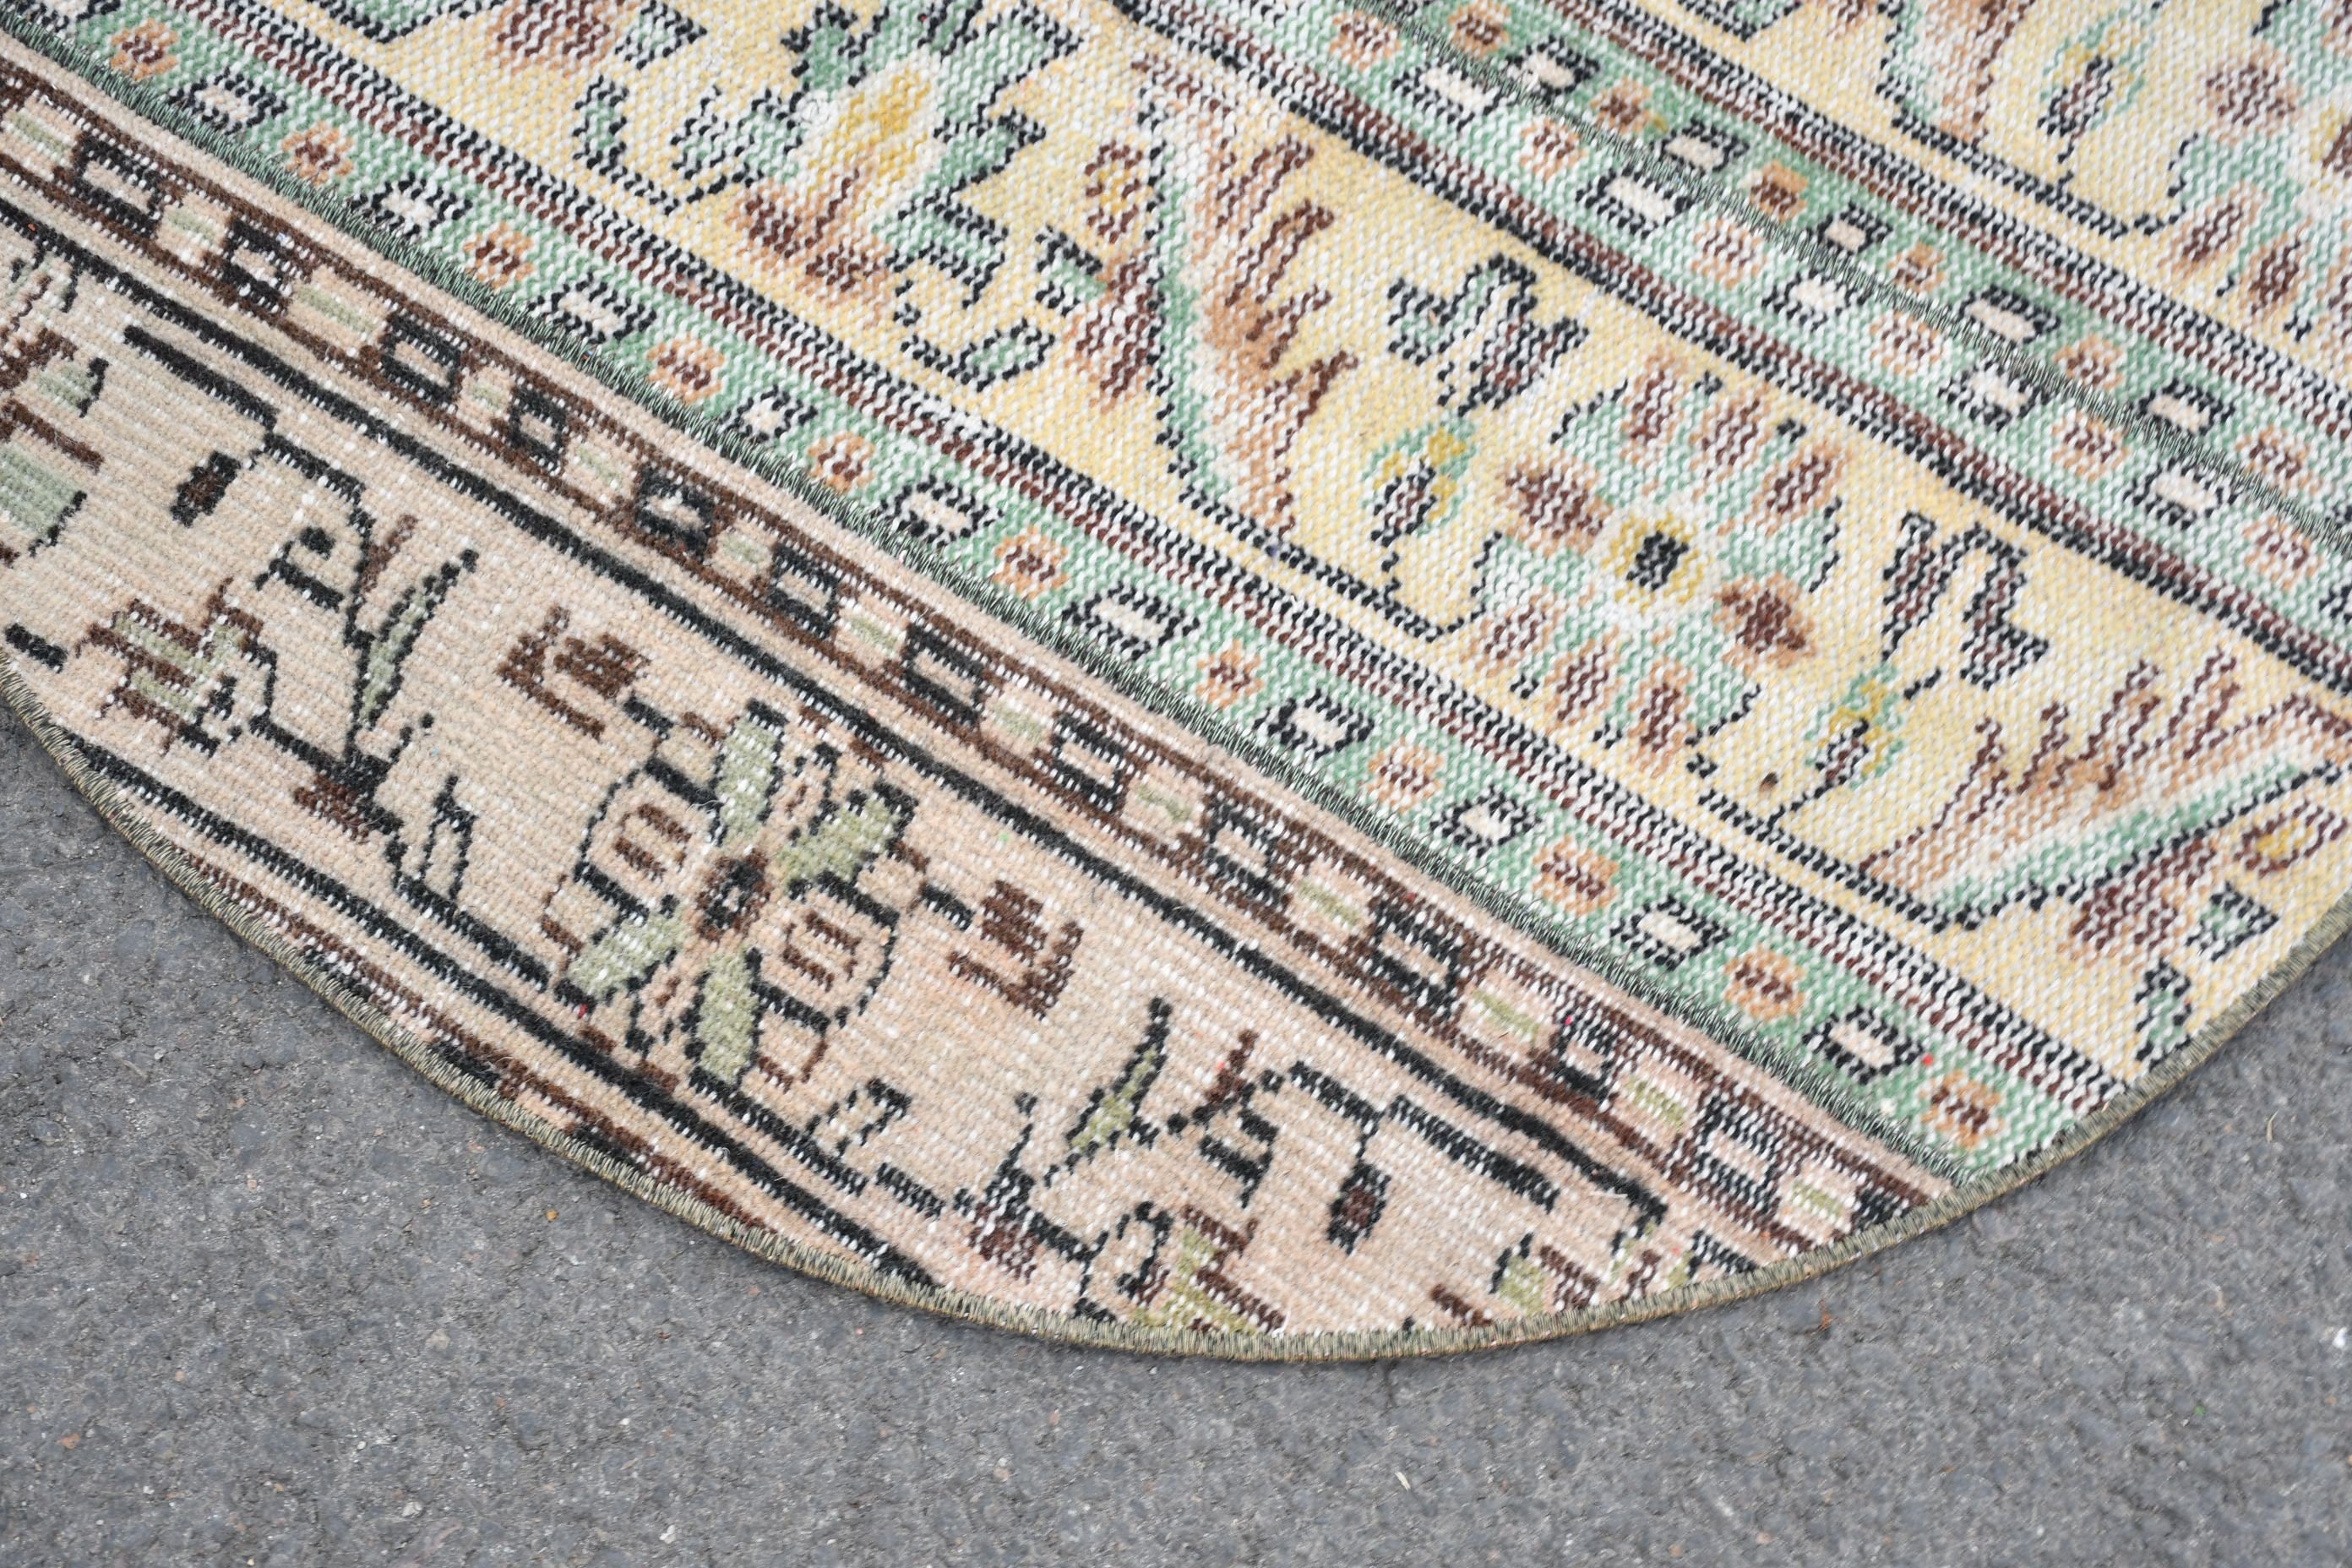 Vintage Rugs, Turkish Rug, 3.1x3.1 ft Small Rug, Rugs for Wall Hanging, Pale Rug, Wall Hanging Rug, Anatolian Rug, Antique Rug, Entry Rugs